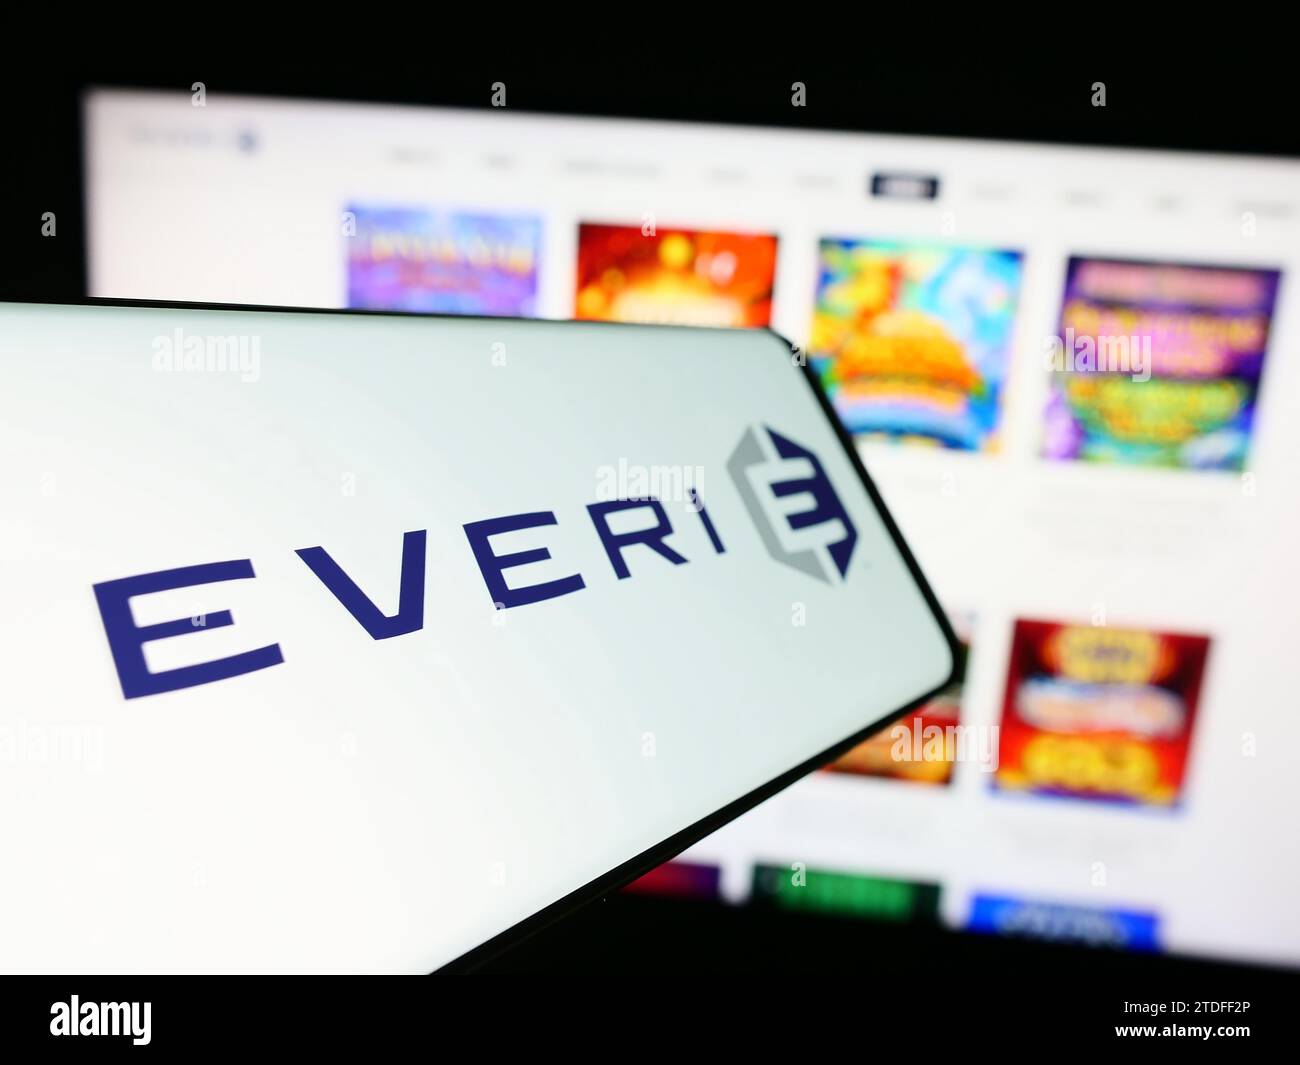 Mobile phone with logo of American slot machine company Everi Holdings Inc. in front of business website. Focus on center-left of phone display. Stock Photo